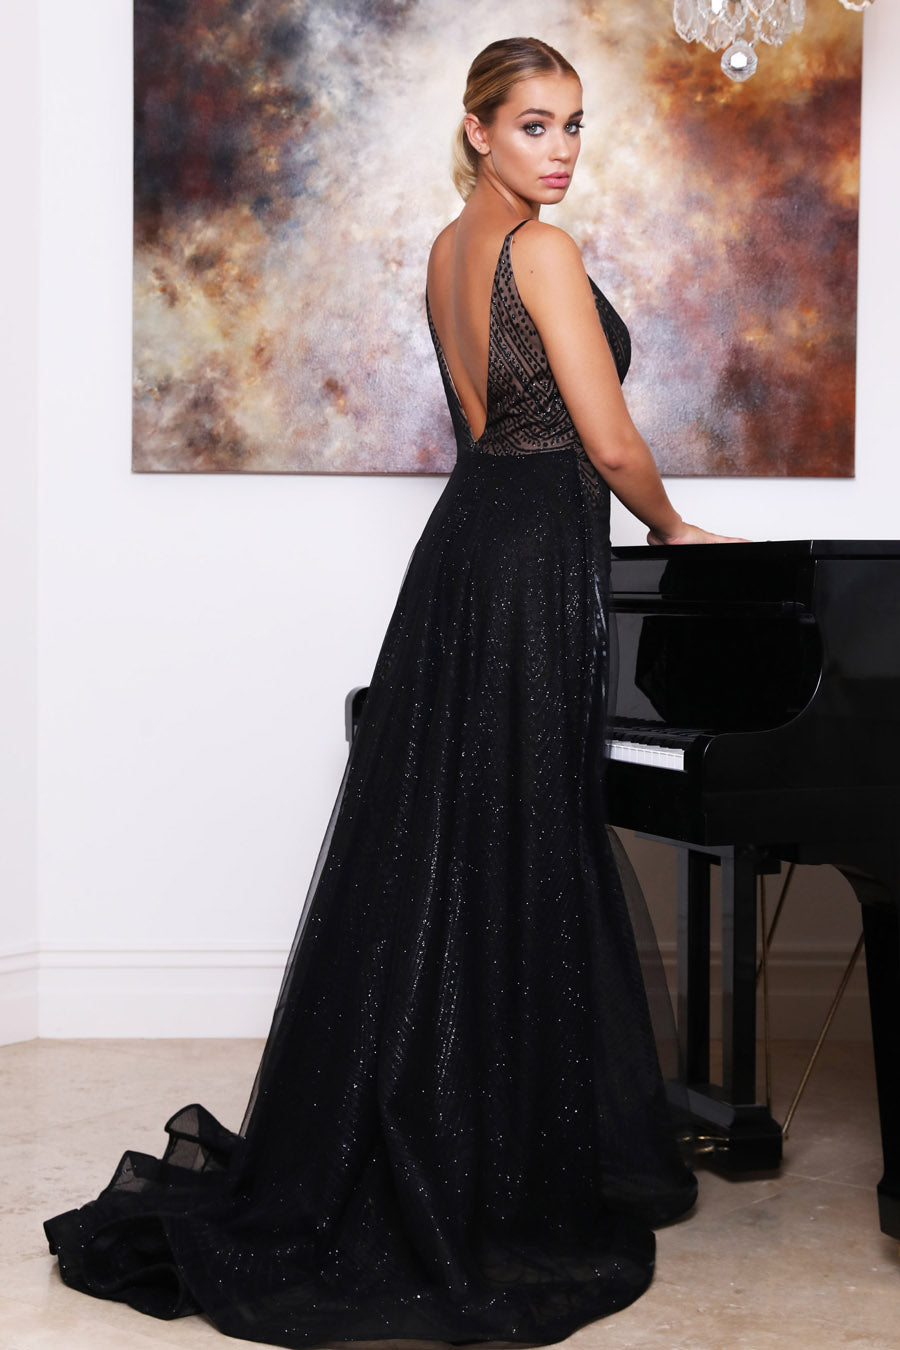 Tinaholy Couture T1844 Black Glitter Drape Mermaid Formal Gown Prom Dress {vendor} AfterPay Humm ZipPay LayBuy Sezzle